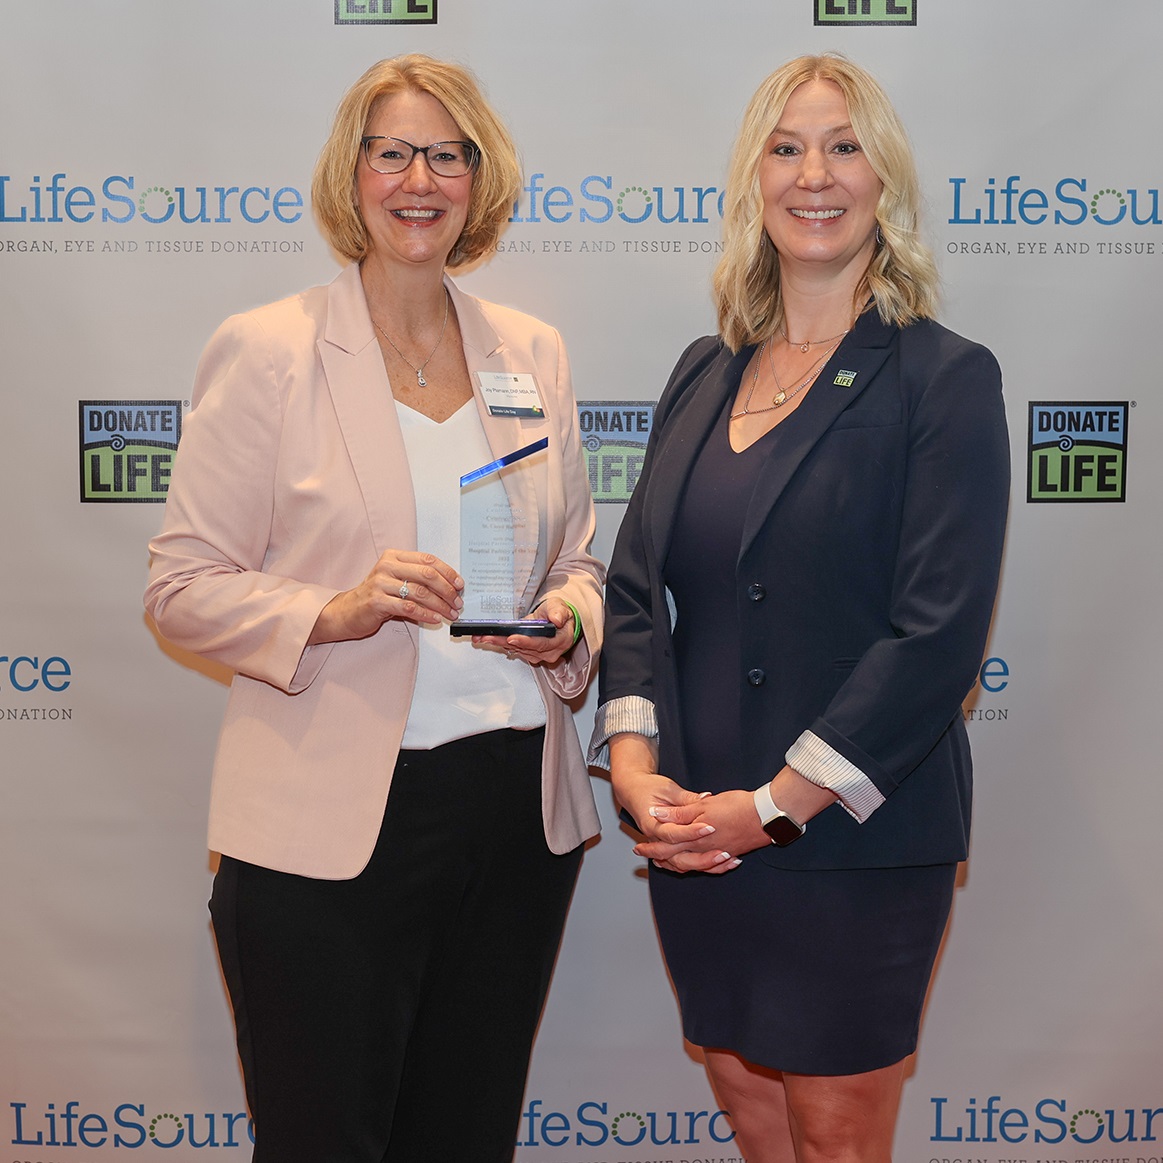 Joy Plamann, CentraCare Chief Operating Officer and St. Cloud Hospital President, and Kelly White, LifeSource CEO at the Donate Life Day event on Saturday, April 15.